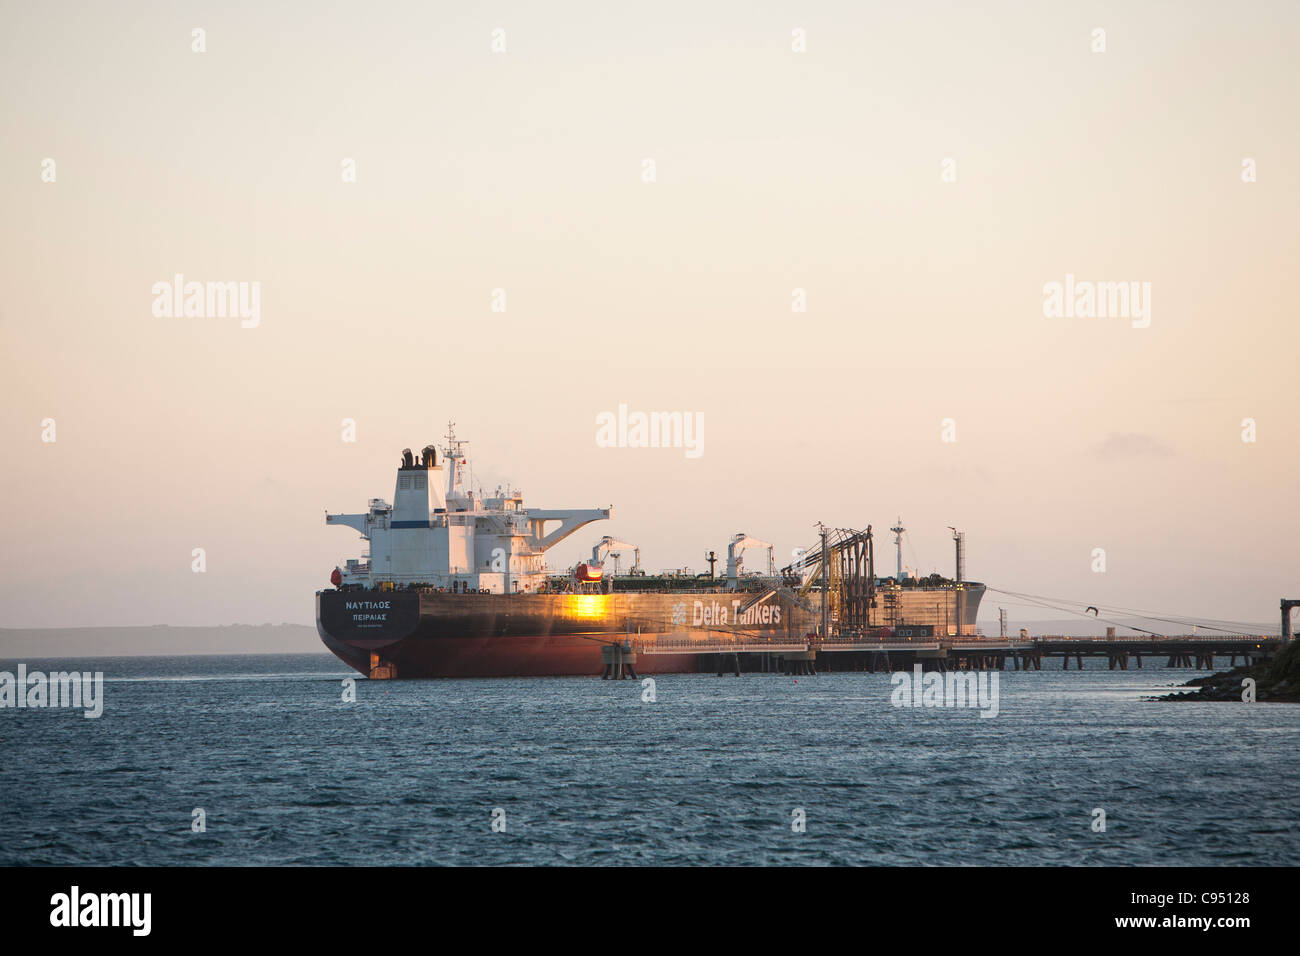 A Greek oil tanker docked at the Flotta oil terminal on the Idsland of flotta in the Orkney's Scotland, UK. Stock Photo